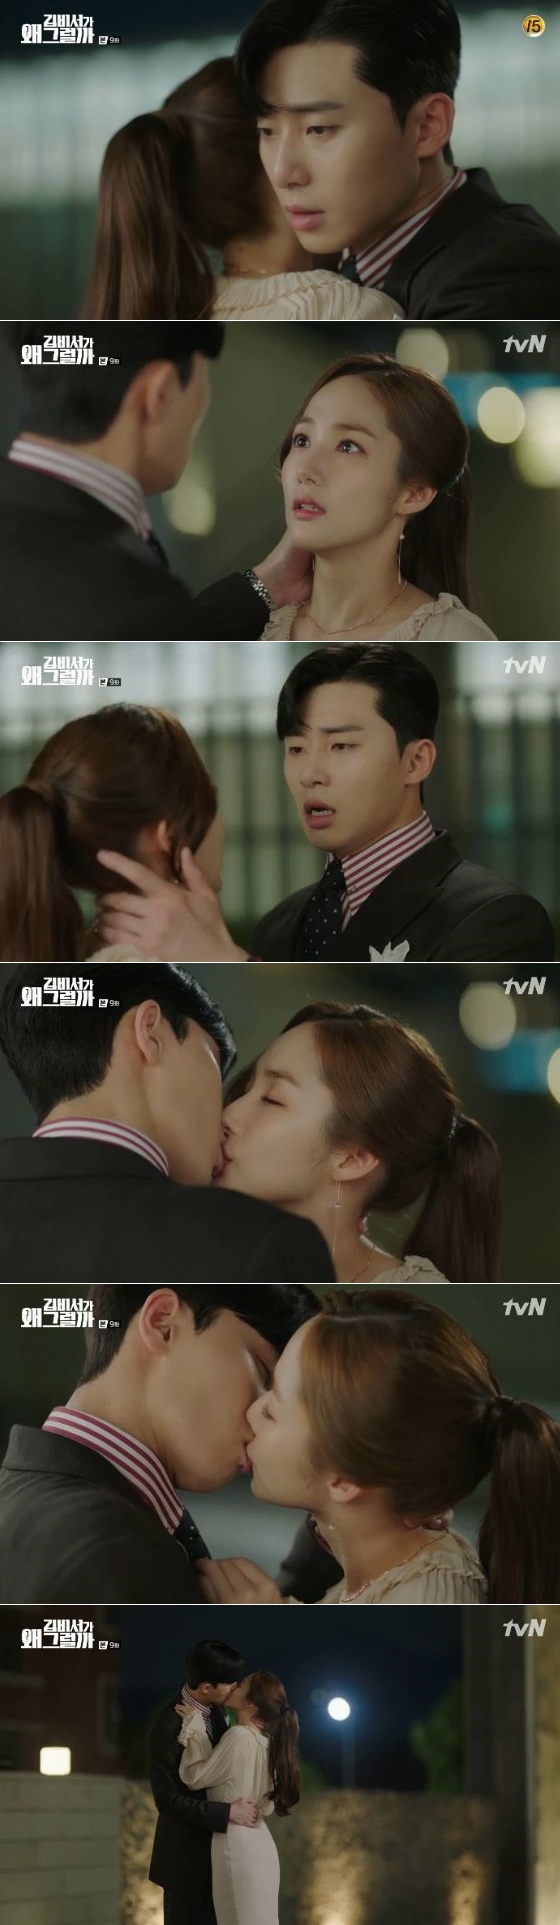 Why is Kim Secretary? Park Seo-joon and Park Min-young finally started a full-fledged love affair.In the TVN drama Why is Secretary Kim doing that? broadcast on the 4th, Lee Yeongjun (Park Seo-joon) and Kim Mi-so (Park Min-young) kissed each other.Lee Yeongjun tried to kiss Kim Mi-so first, but the trauma came to mind at that moment and hesitantly couldnt kiss her.Kim Mi-so first approached Lee Yeongjun and kissed him and confirmed his love.Meanwhile, Lee Yeongjun, who made his first kiss, told Kim Mi-so, Lets be sure.Somethings going on between them, starting dating, he shouted, my girl. Lee Yeongjun continued, Im handsome, Im rich.I have a lot of things, so marry me. Kim Mi-so laughed, I have not been married for less than an hour, but I am a little hasty. 